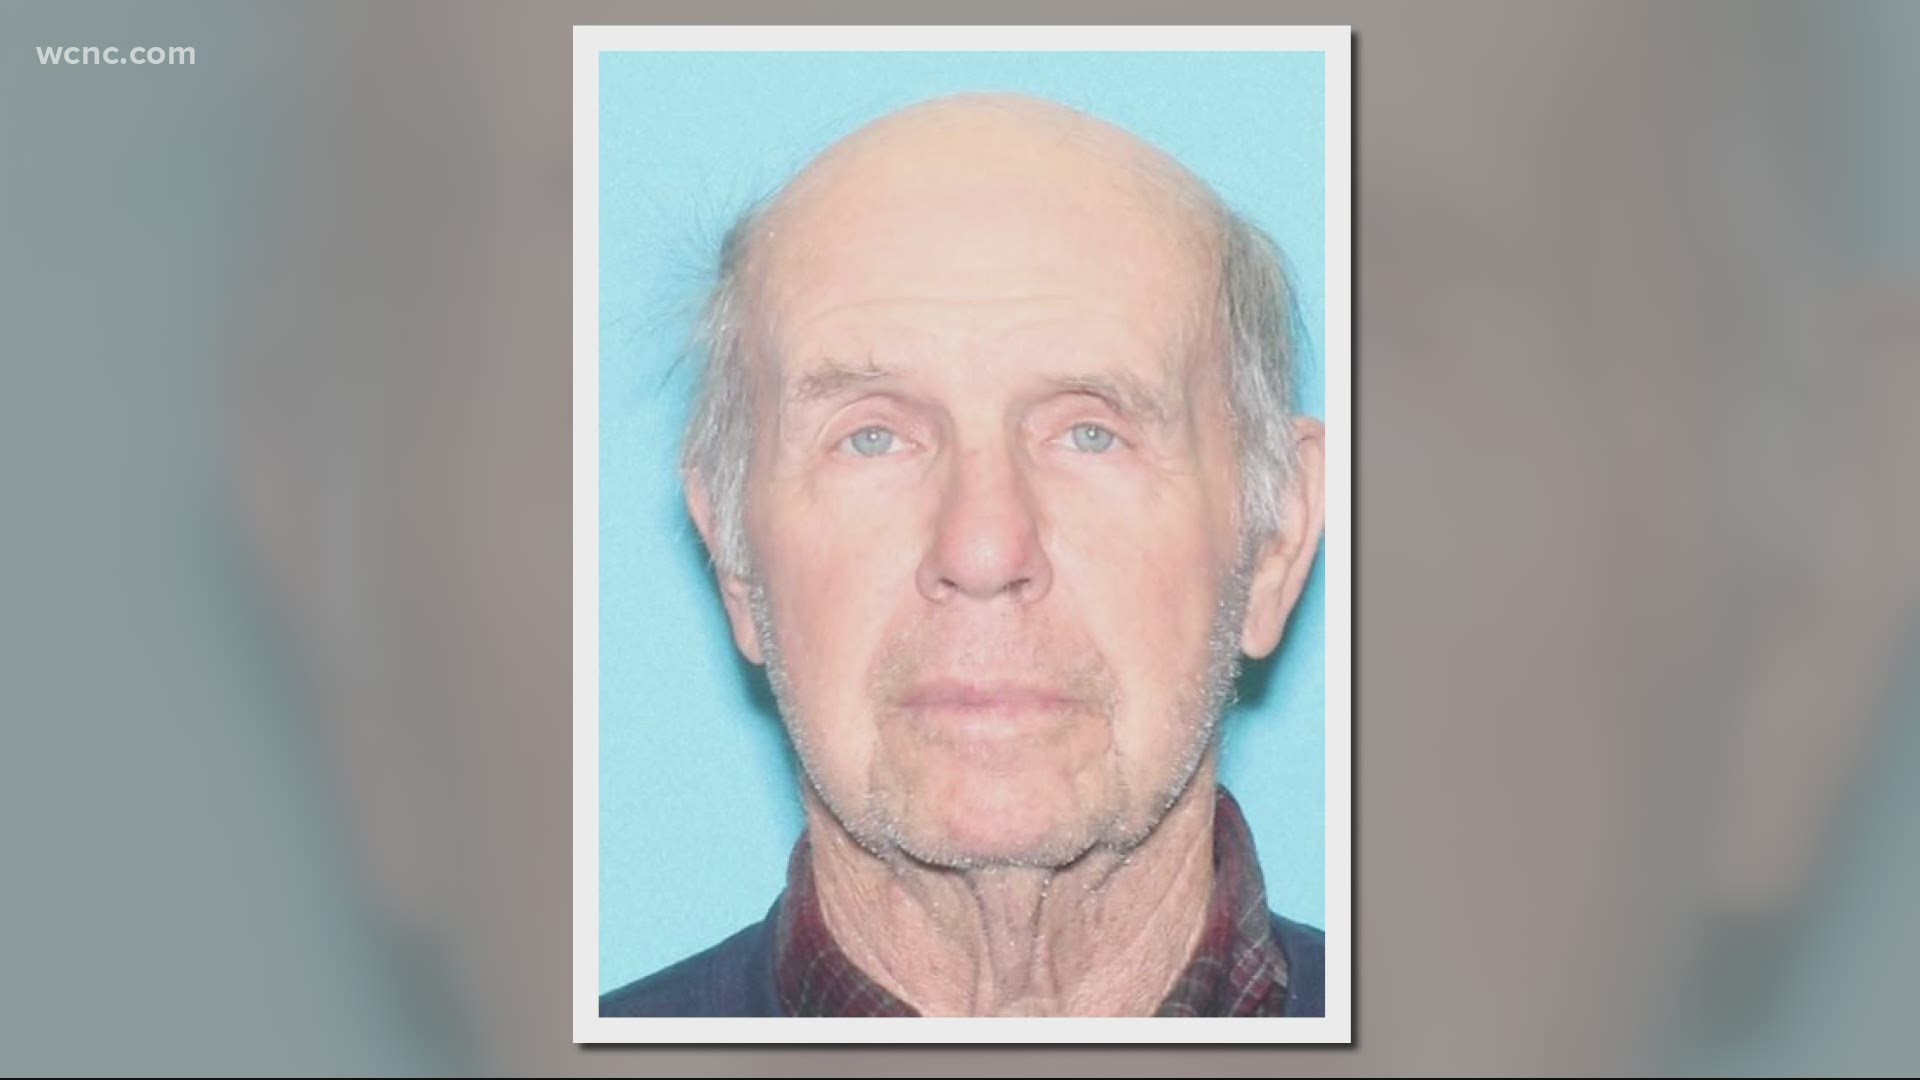 Police in Matthews are asking for the public's help finding a missing elderly man who may be suffering from dementia.